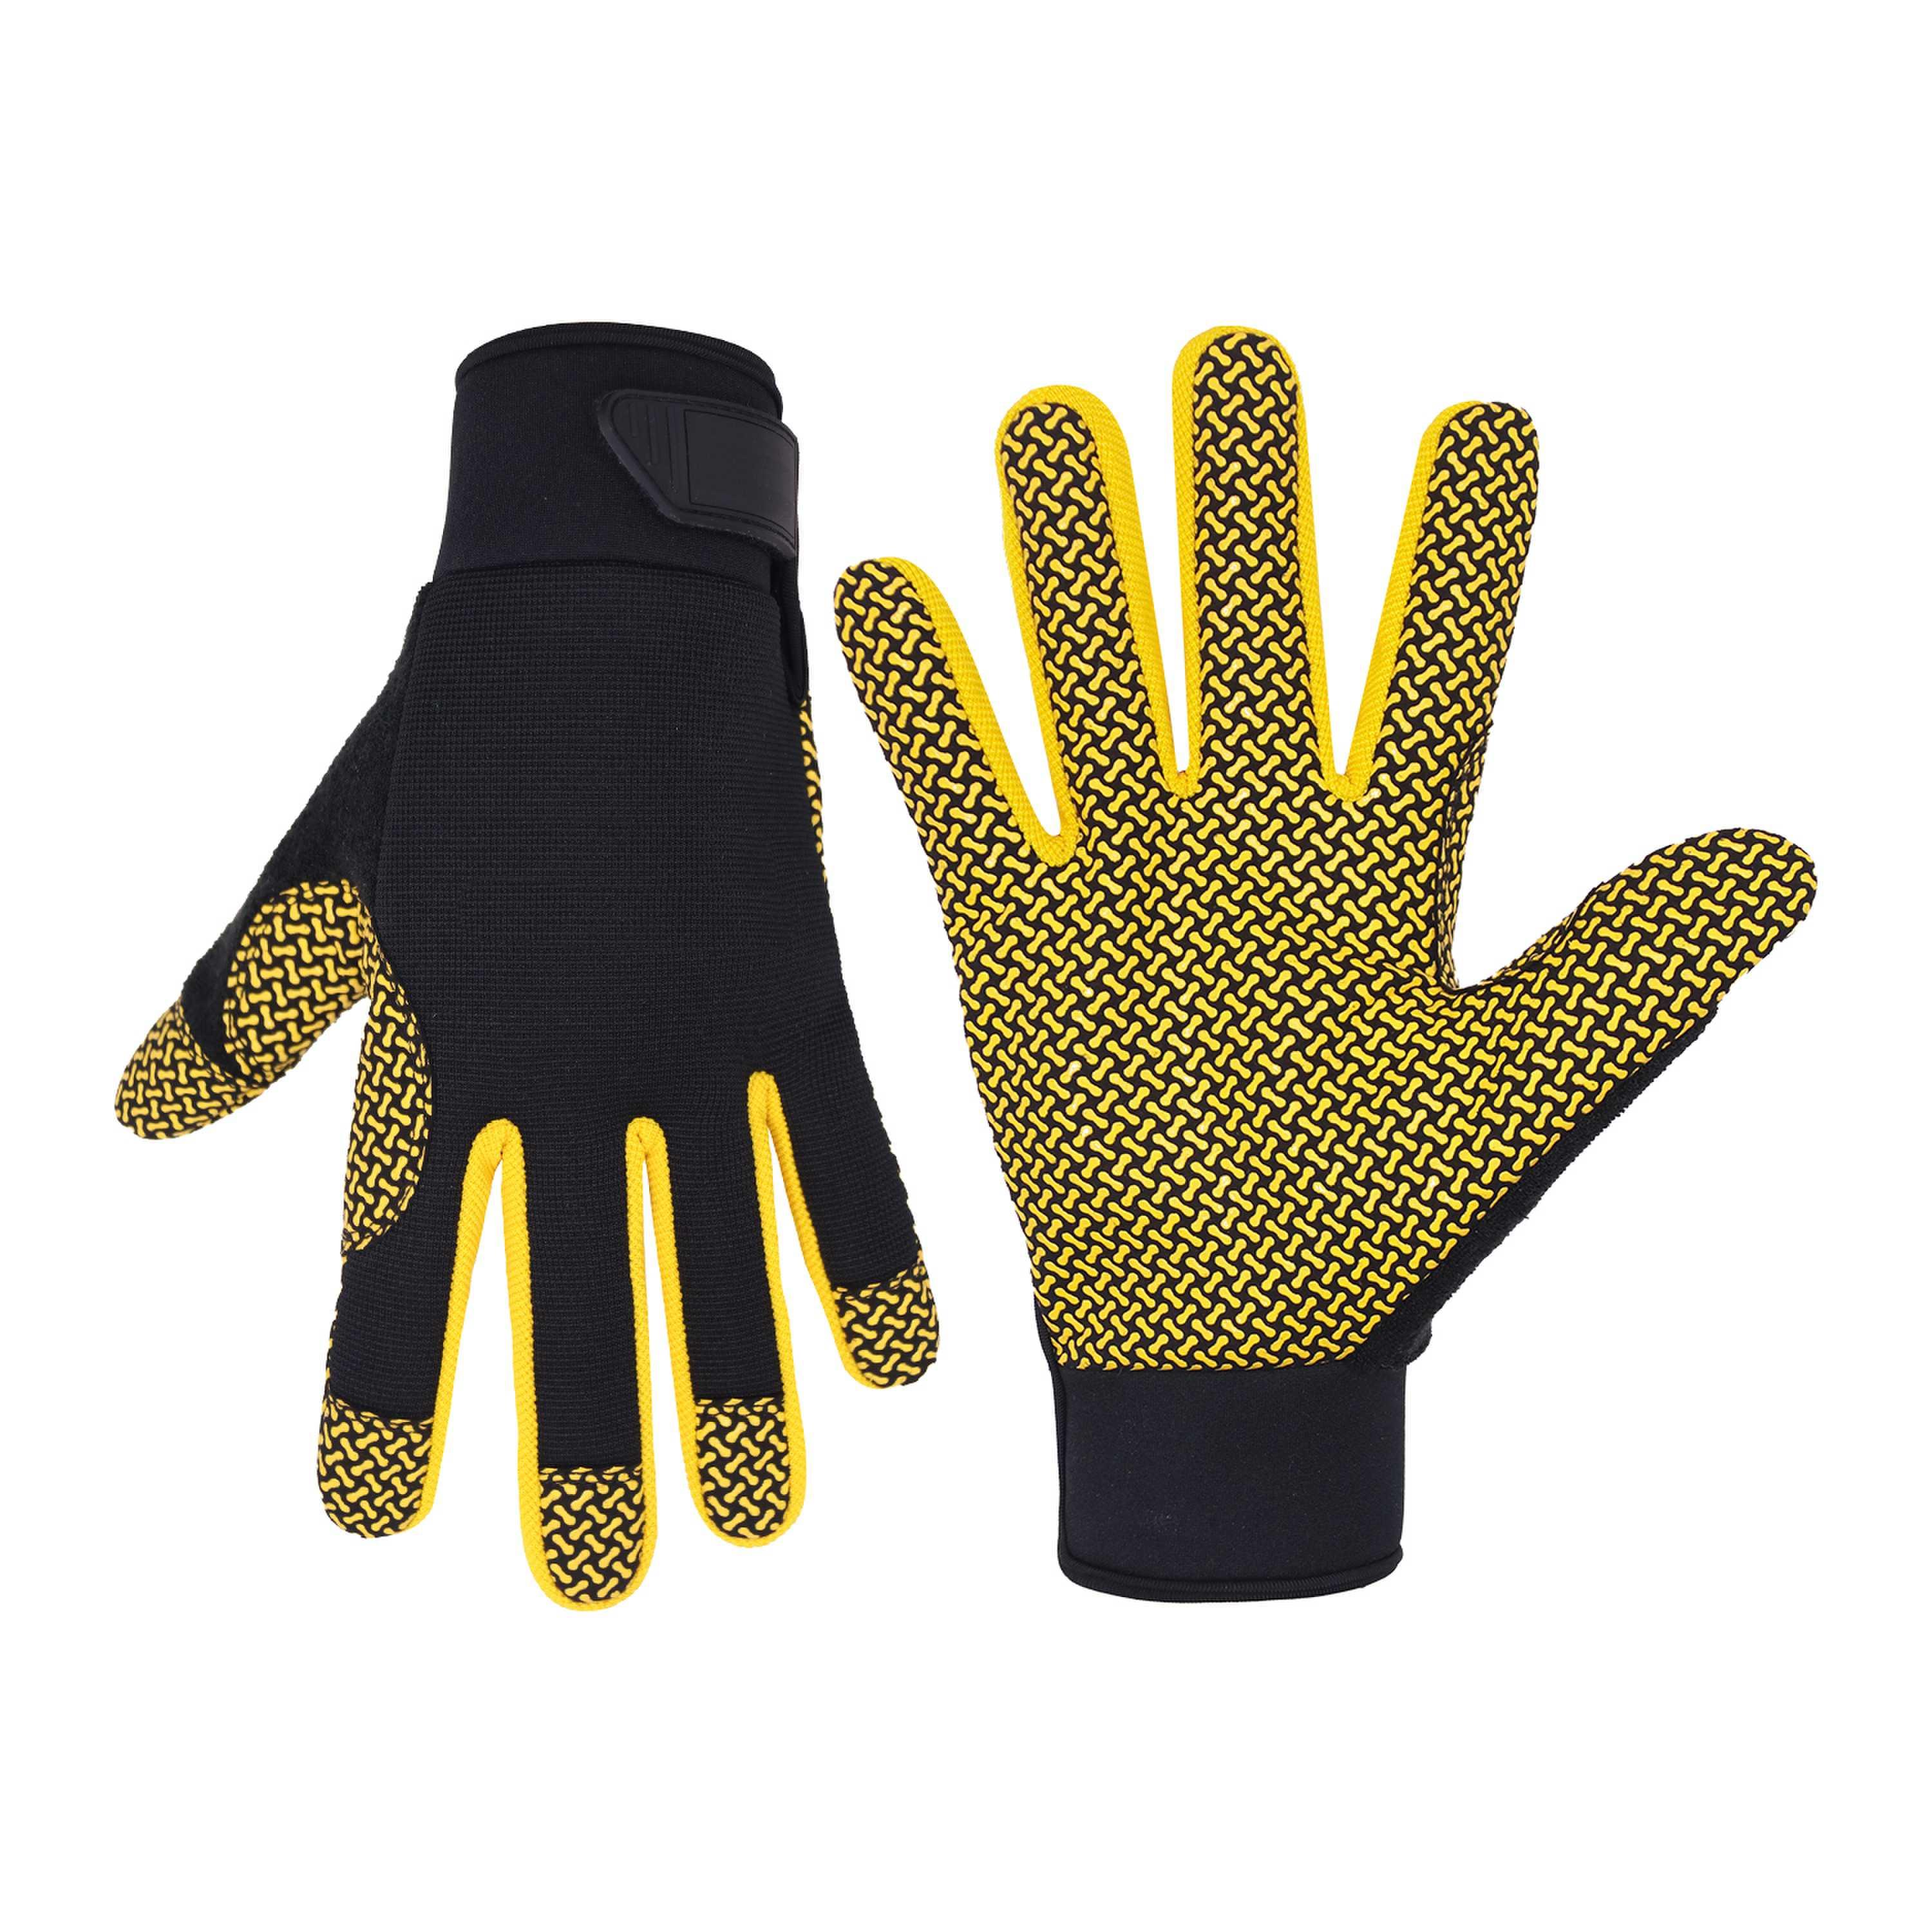 6151 PRISAFETY Silicone Coating Palm Anti-slip Flex Grip Sport Gloves Outdoor Cycling Motorbike Gloves for Men